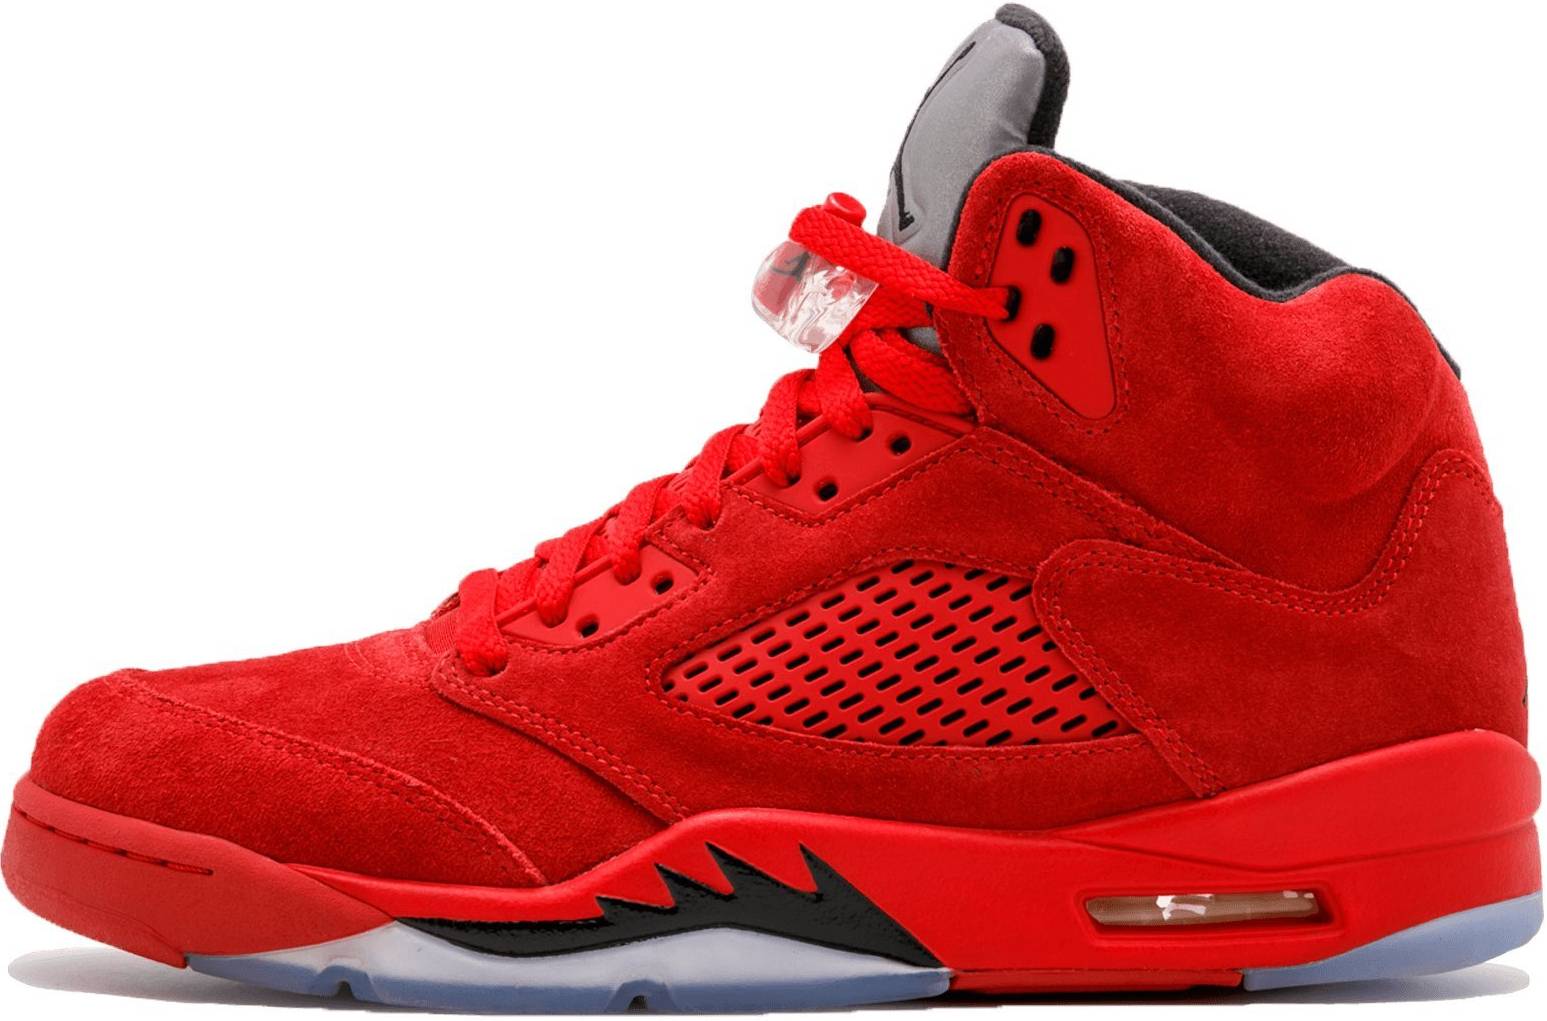 jordan shoes in red colour